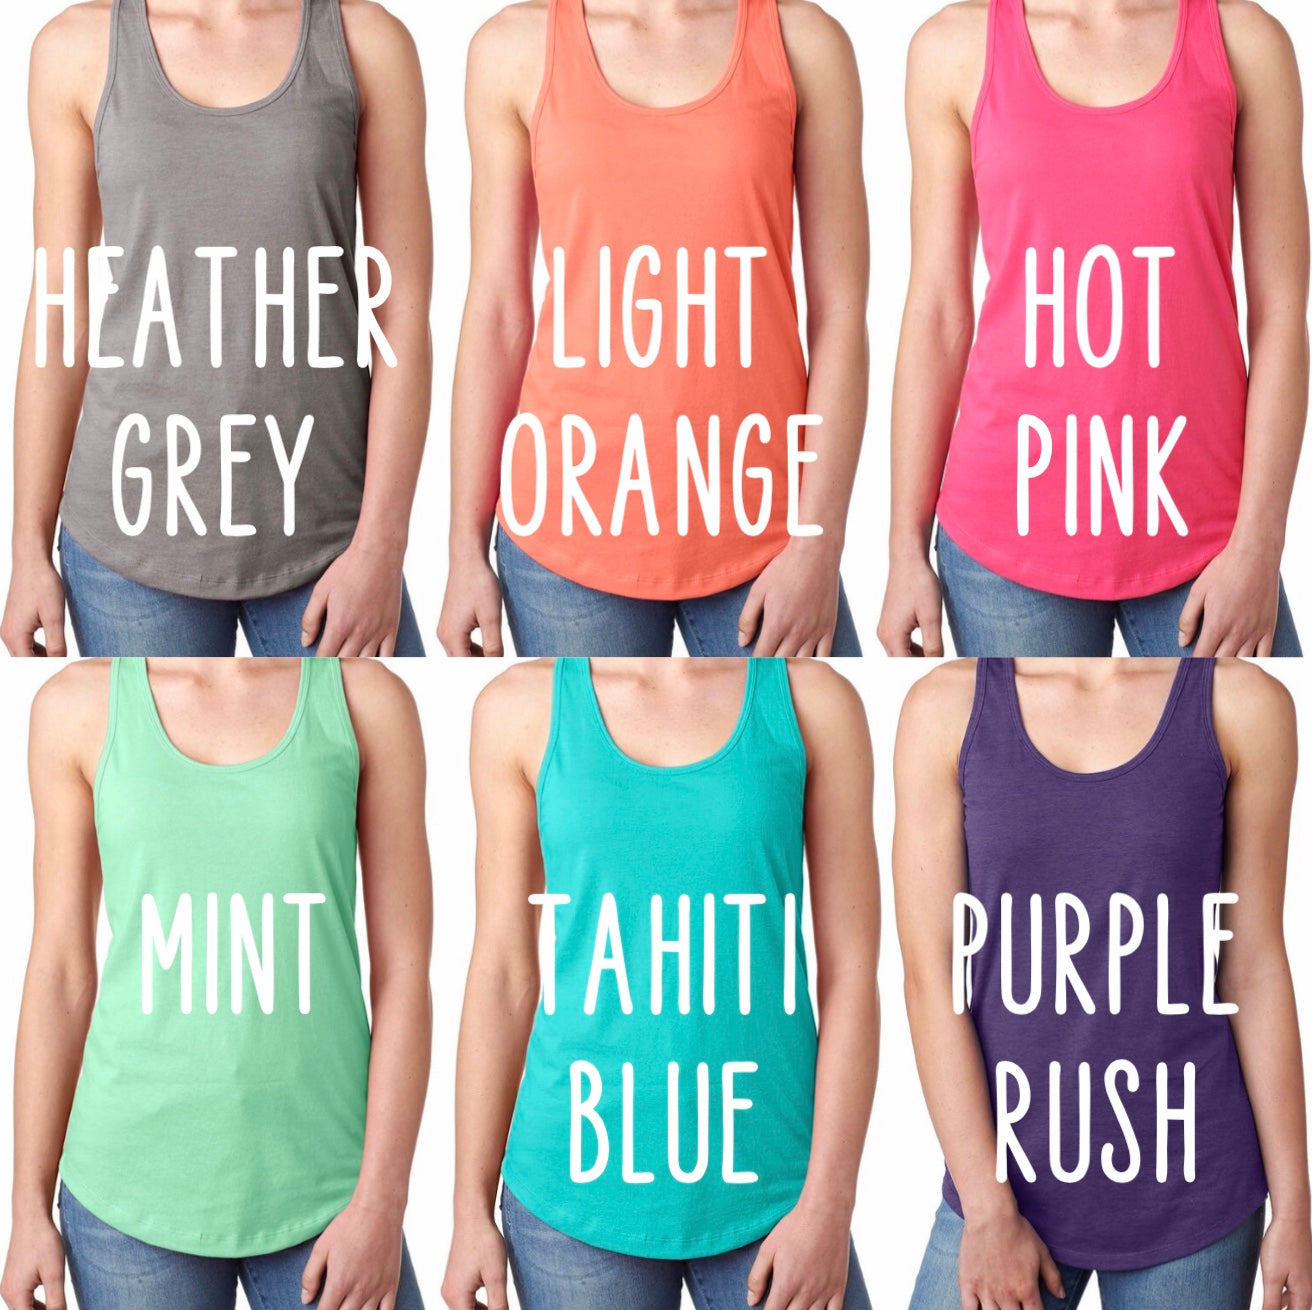 Sunshine Mixed with a Little Hurricane racer back tank top